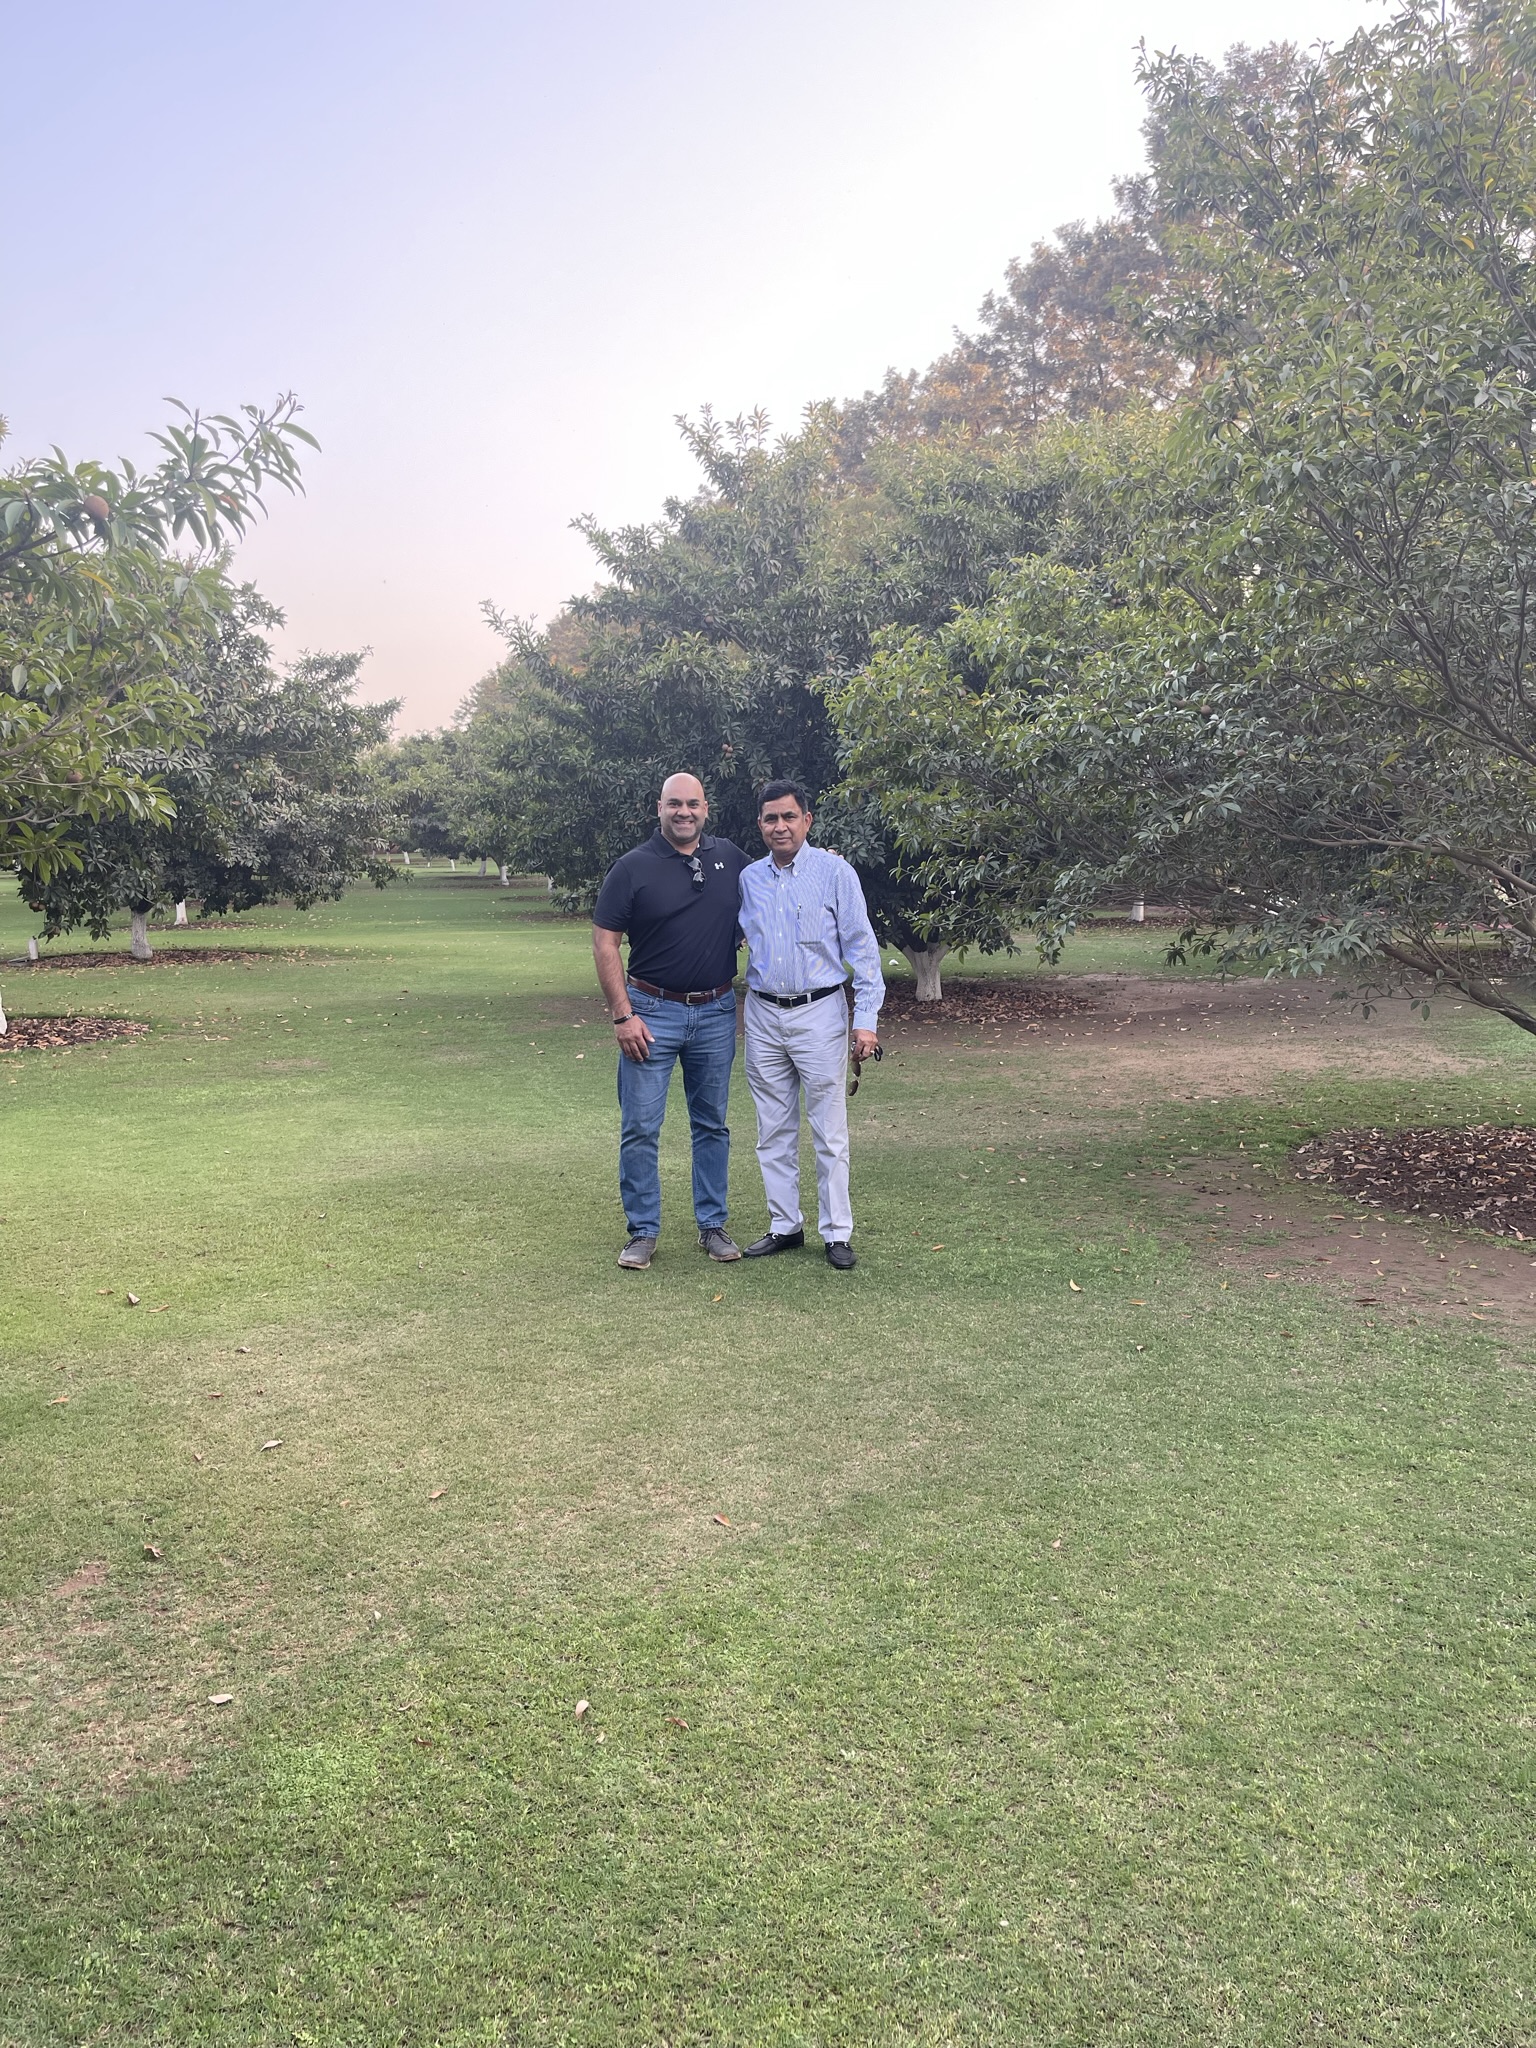 Recognizing the need for an alternative to the endangered Pygeum africanum, the research team at Cepham analyzed various species in the Prunus genus. Commonly known as plum trees, Prunus domestica, emerged as a promising candidate due to its remarkable phytochemical composition. Pictured left to right, Sameer Joshi, COO of Cepham, and Pawan Goel, owner of Experimental Organic Farm, where the product was first conceived.